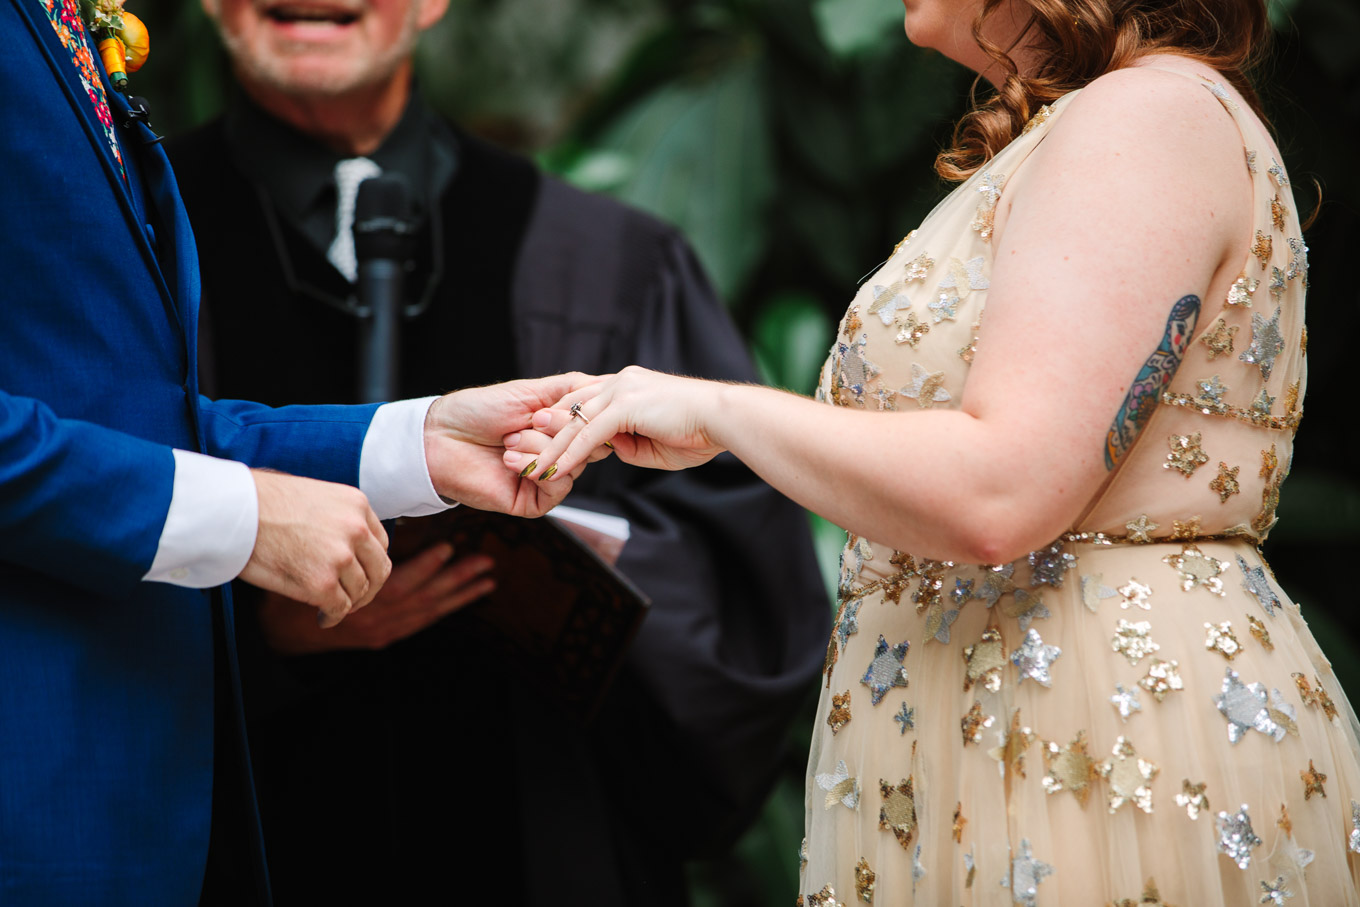 Ring exchange during wedding ceremony | Colorful Downtown Los Angeles Valentine Wedding | Los Angeles wedding photographer | #losangeleswedding #colorfulwedding #DTLA #valentinedtla   Source: Mary Costa Photography | Los Angeles